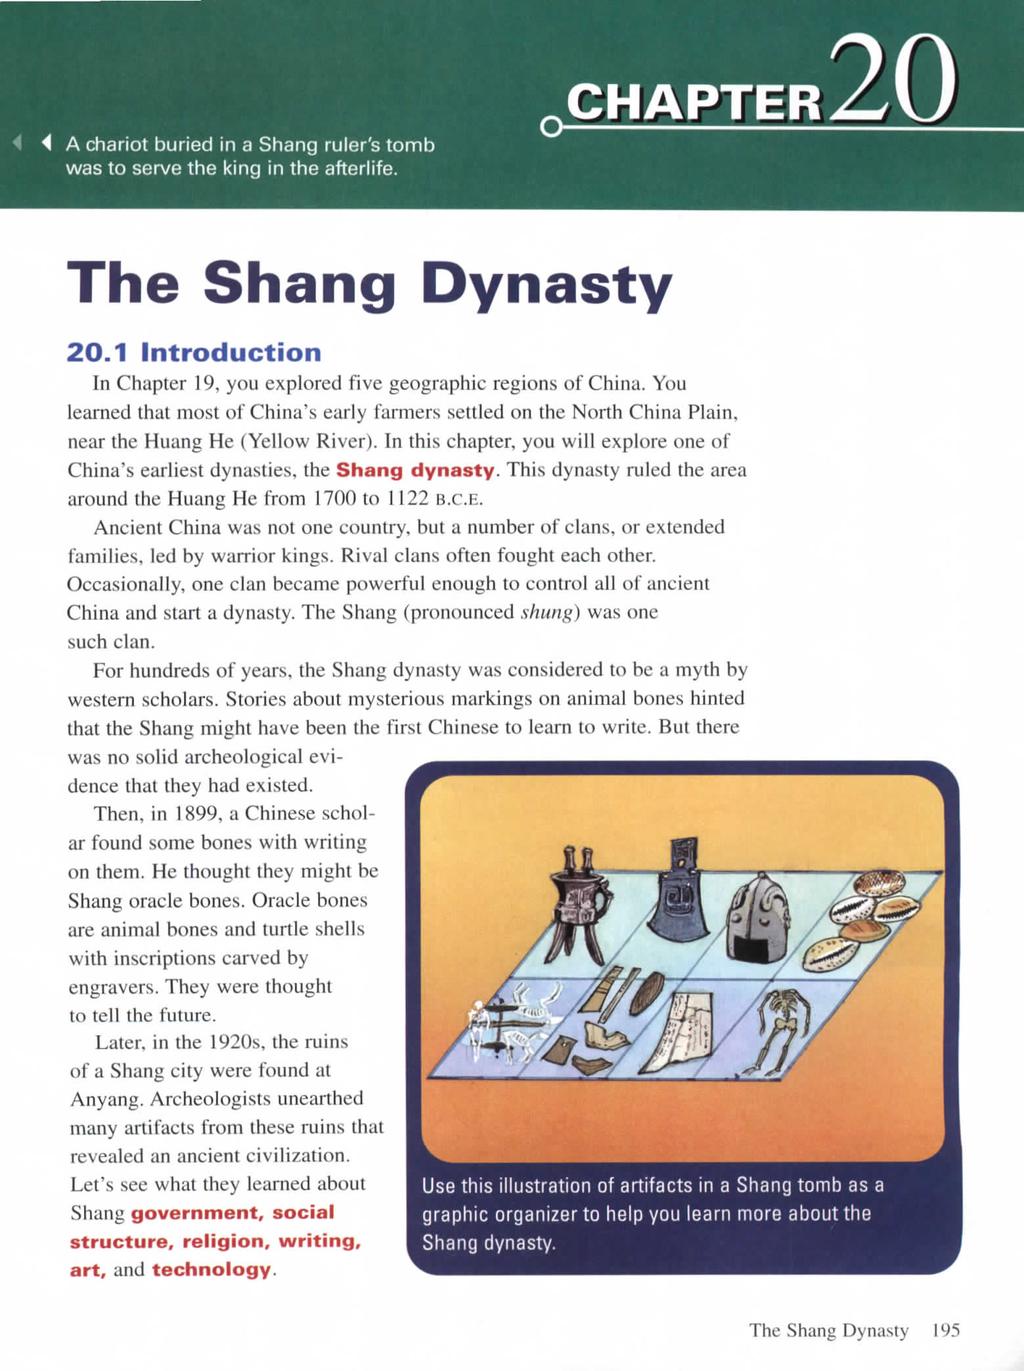 4 A chariot buried in a Shang ruler's tomb was to serve the king in the afterlife. CHAPTER I The Shang Dynasty 20.1 Introduction In Chapter 19, you explored five geographic regions of China.